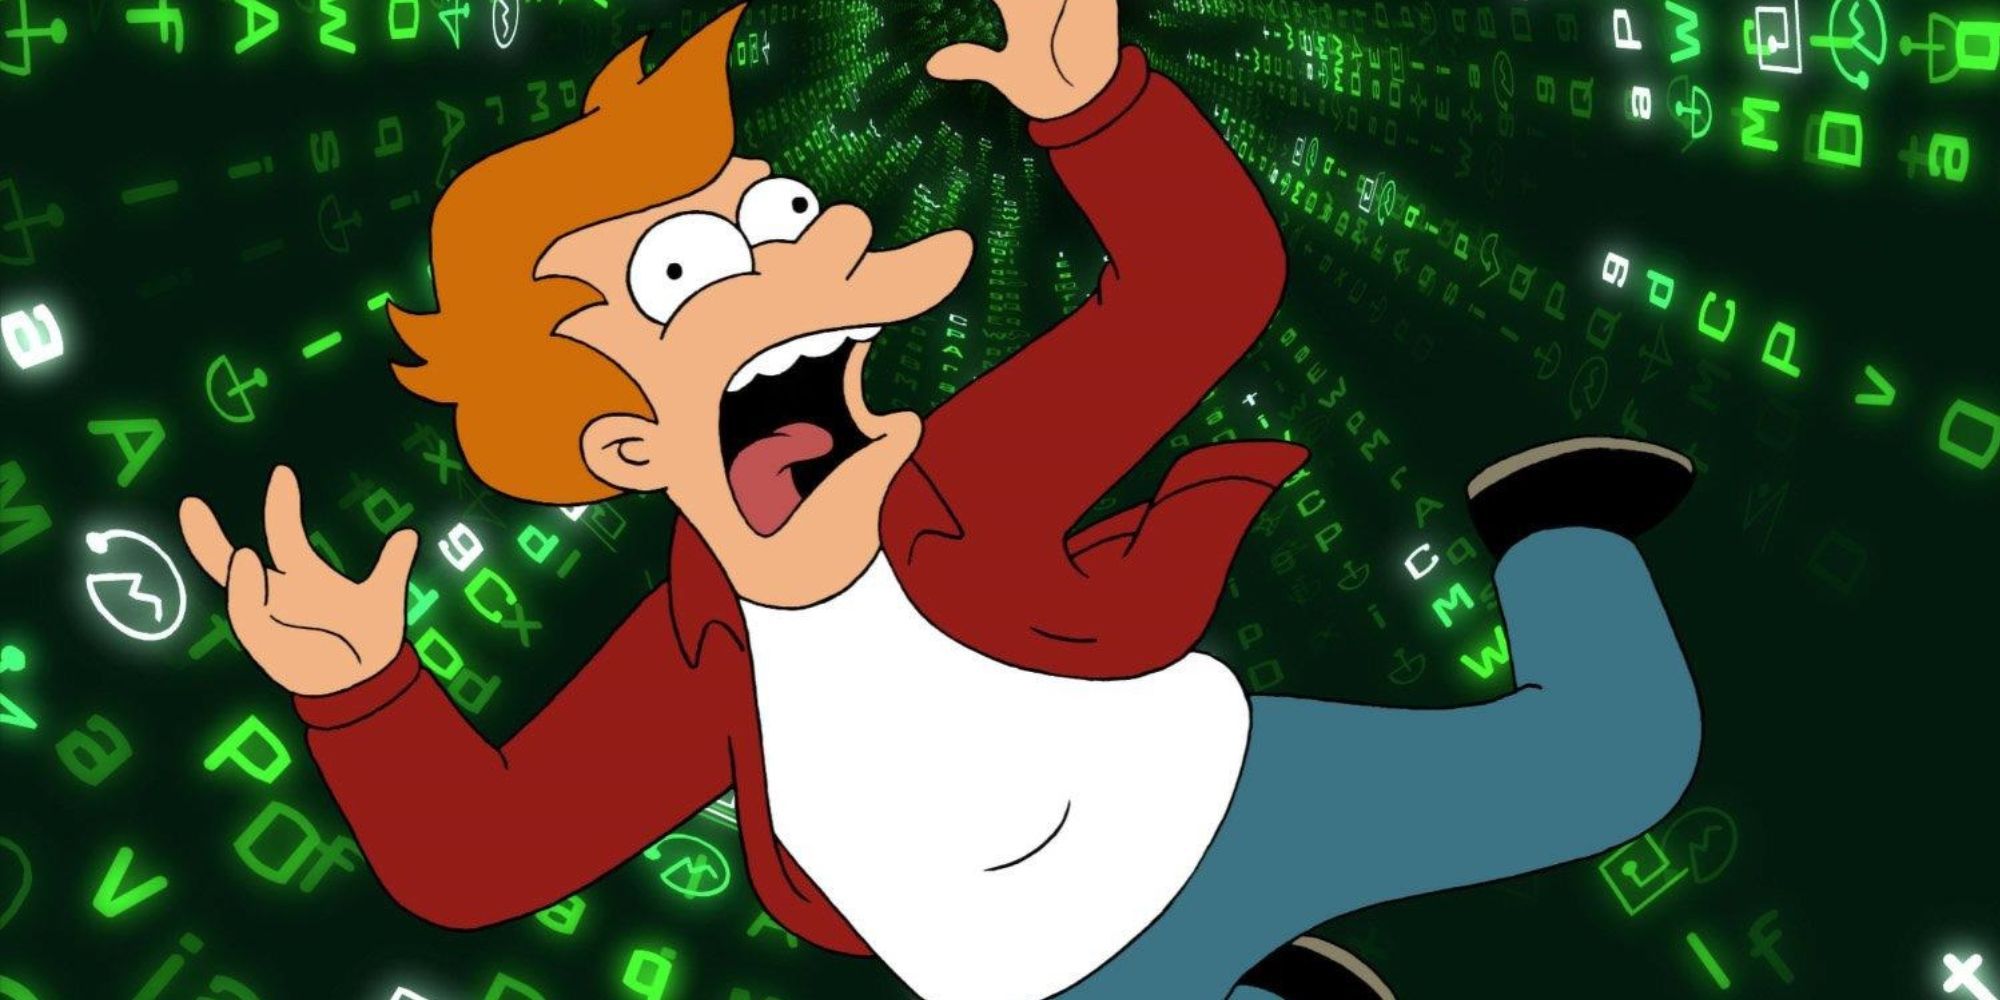 Fry from Futurama falling through a black and green digital setting that looks like The Matrix